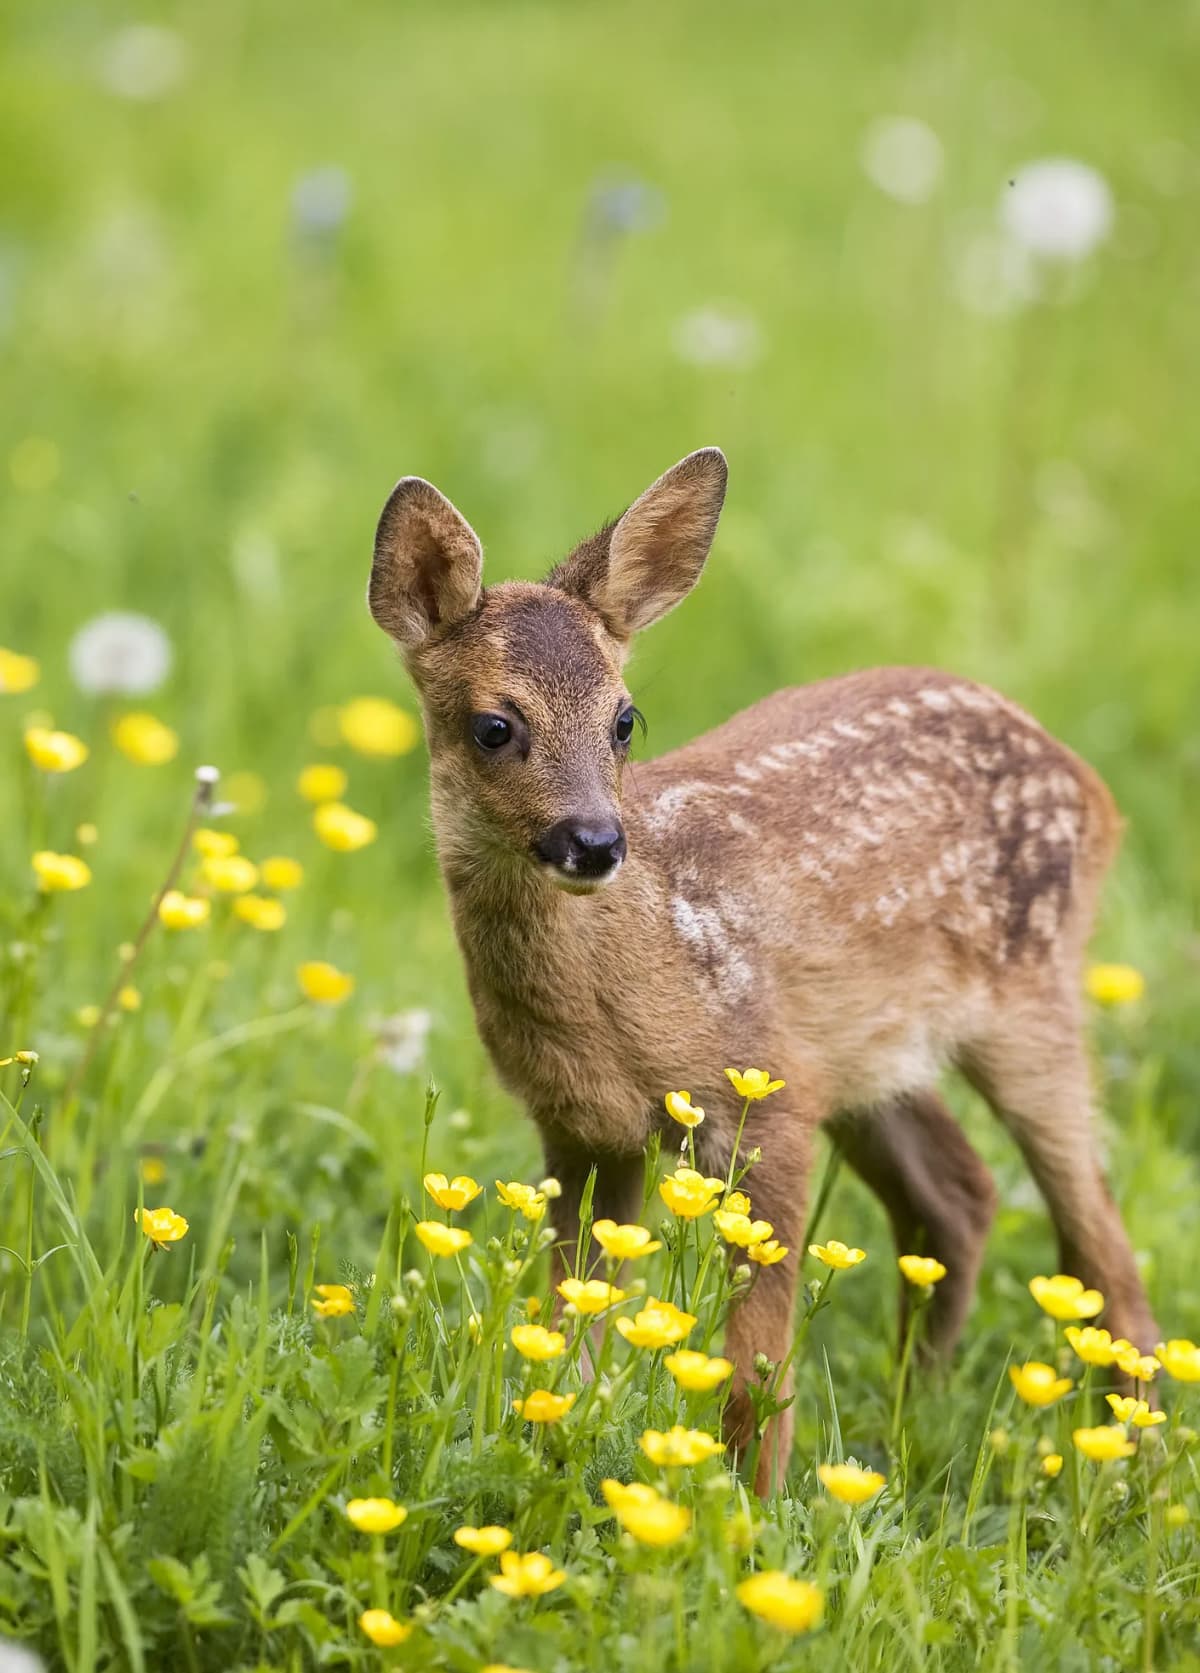 A young fawn standing in a garden